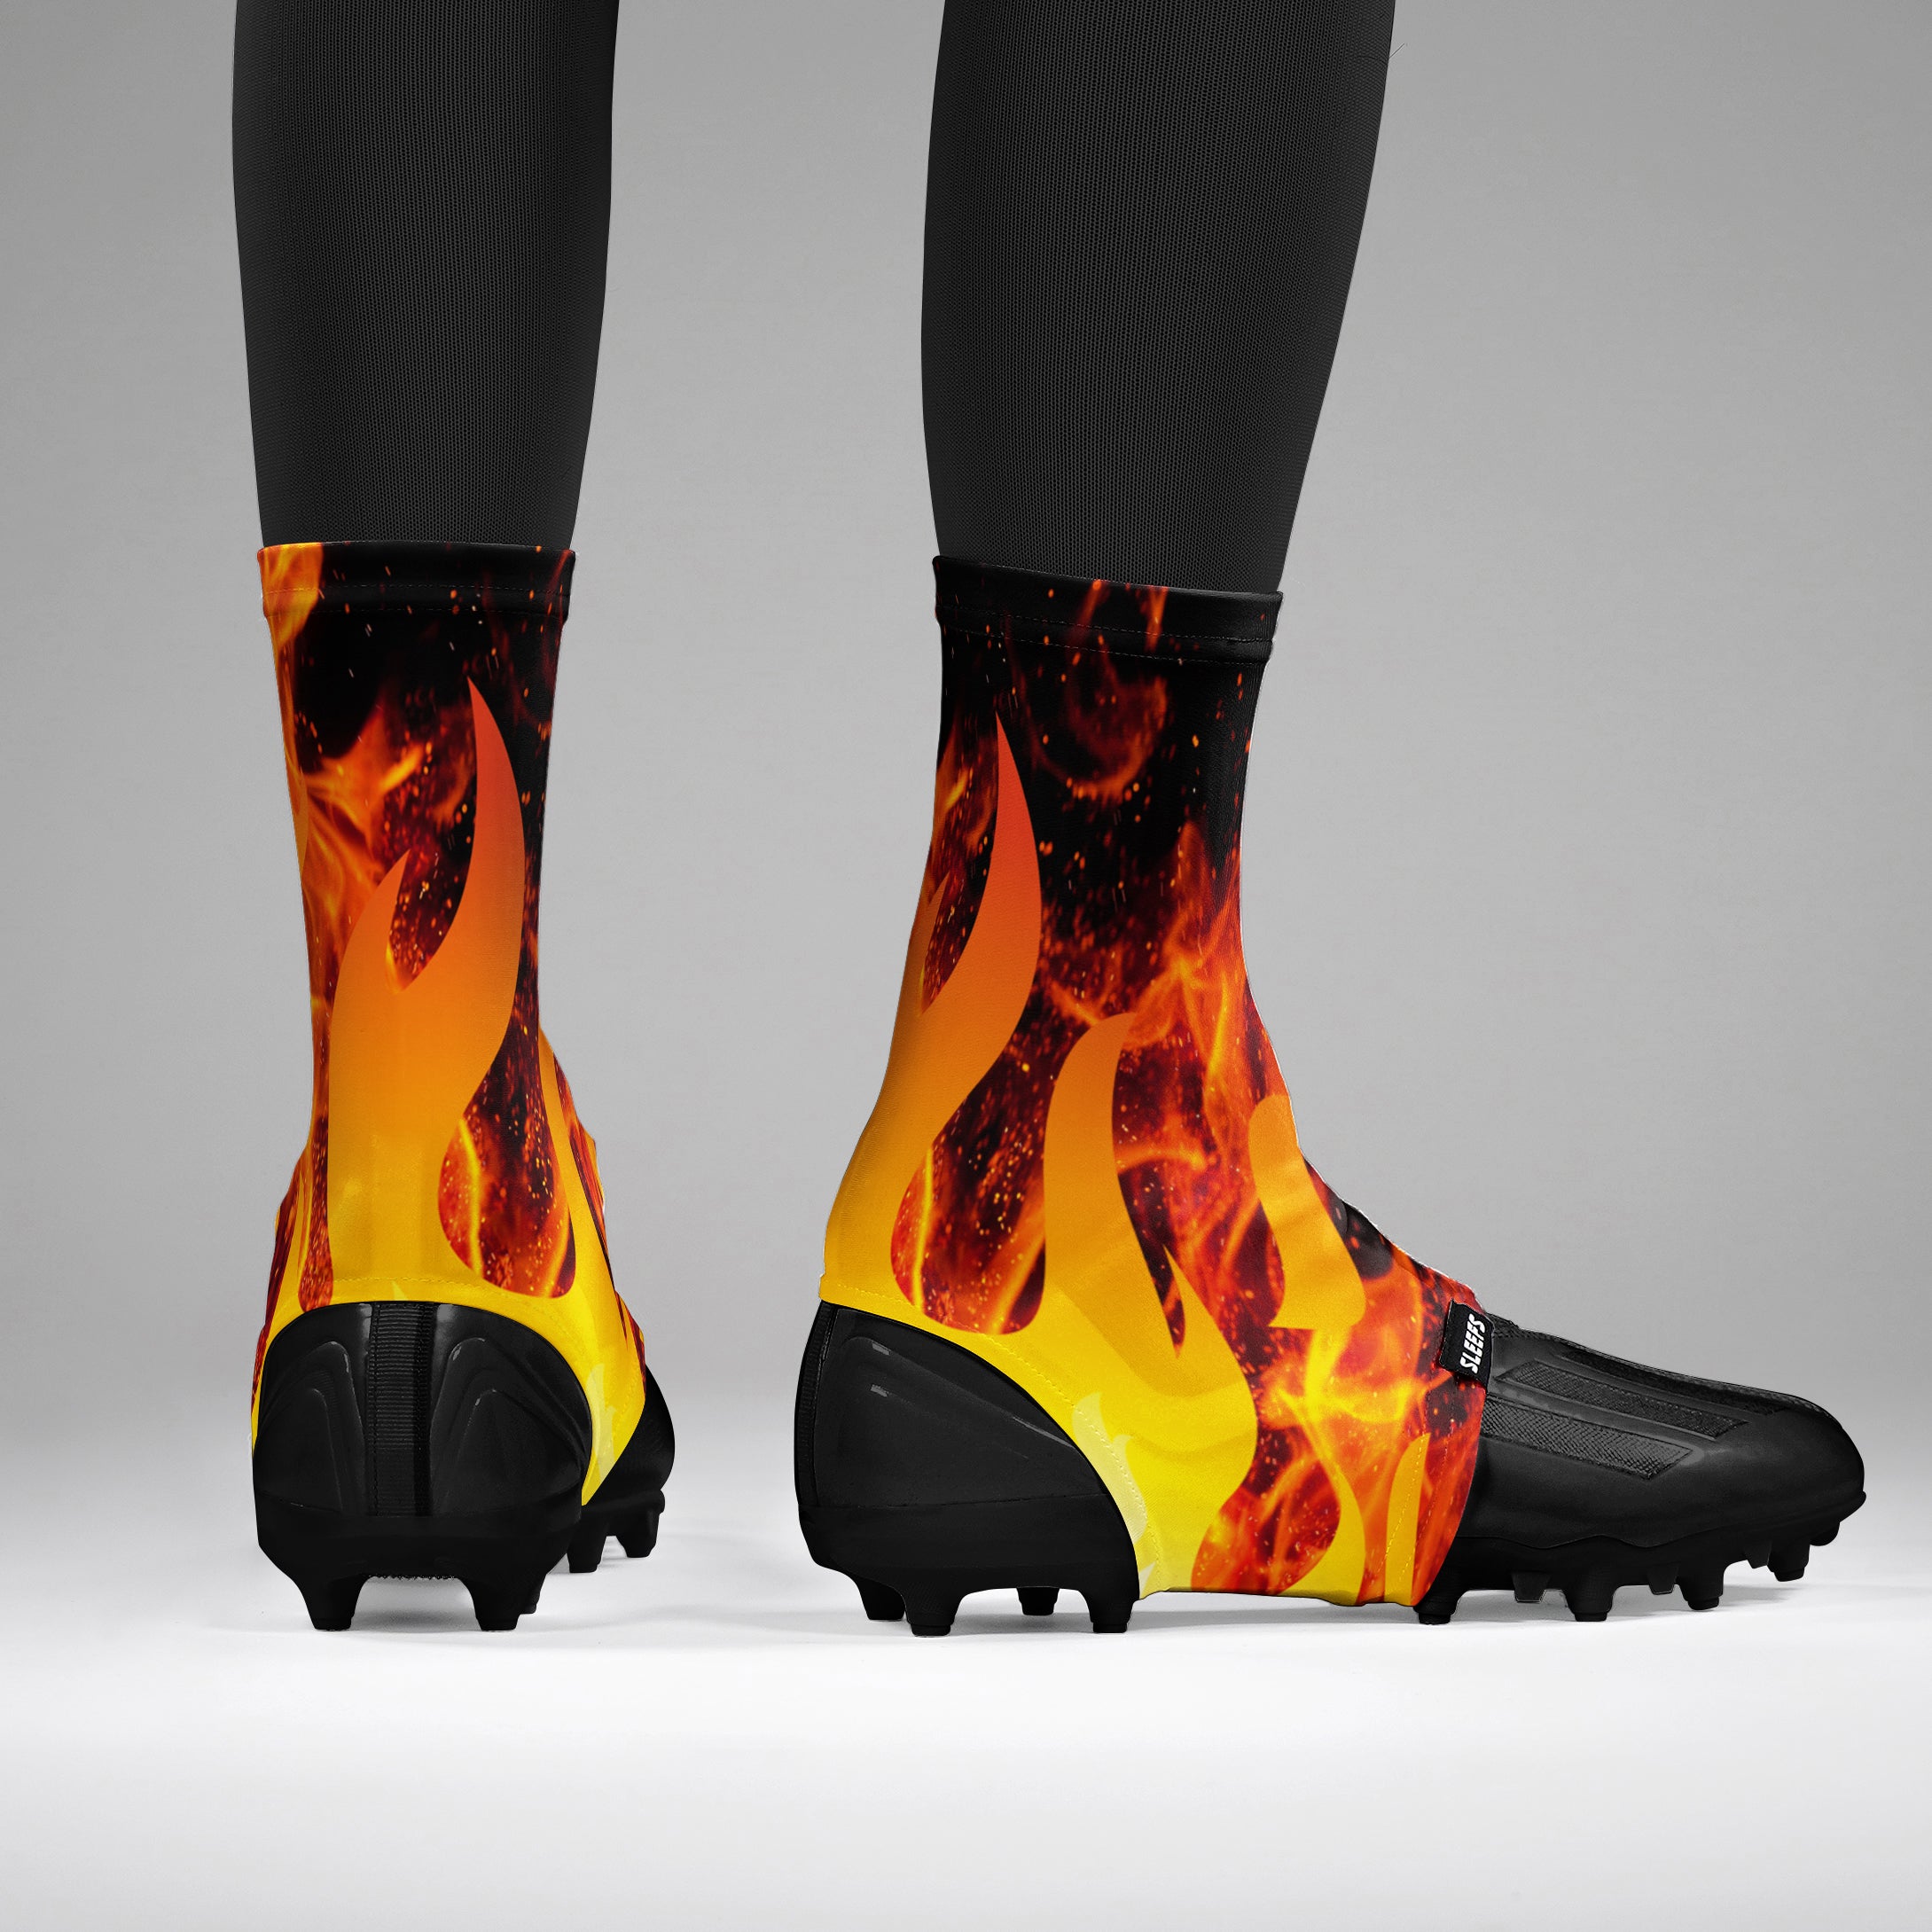 Black Fire Spats / Cleat Covers – SLEEFS